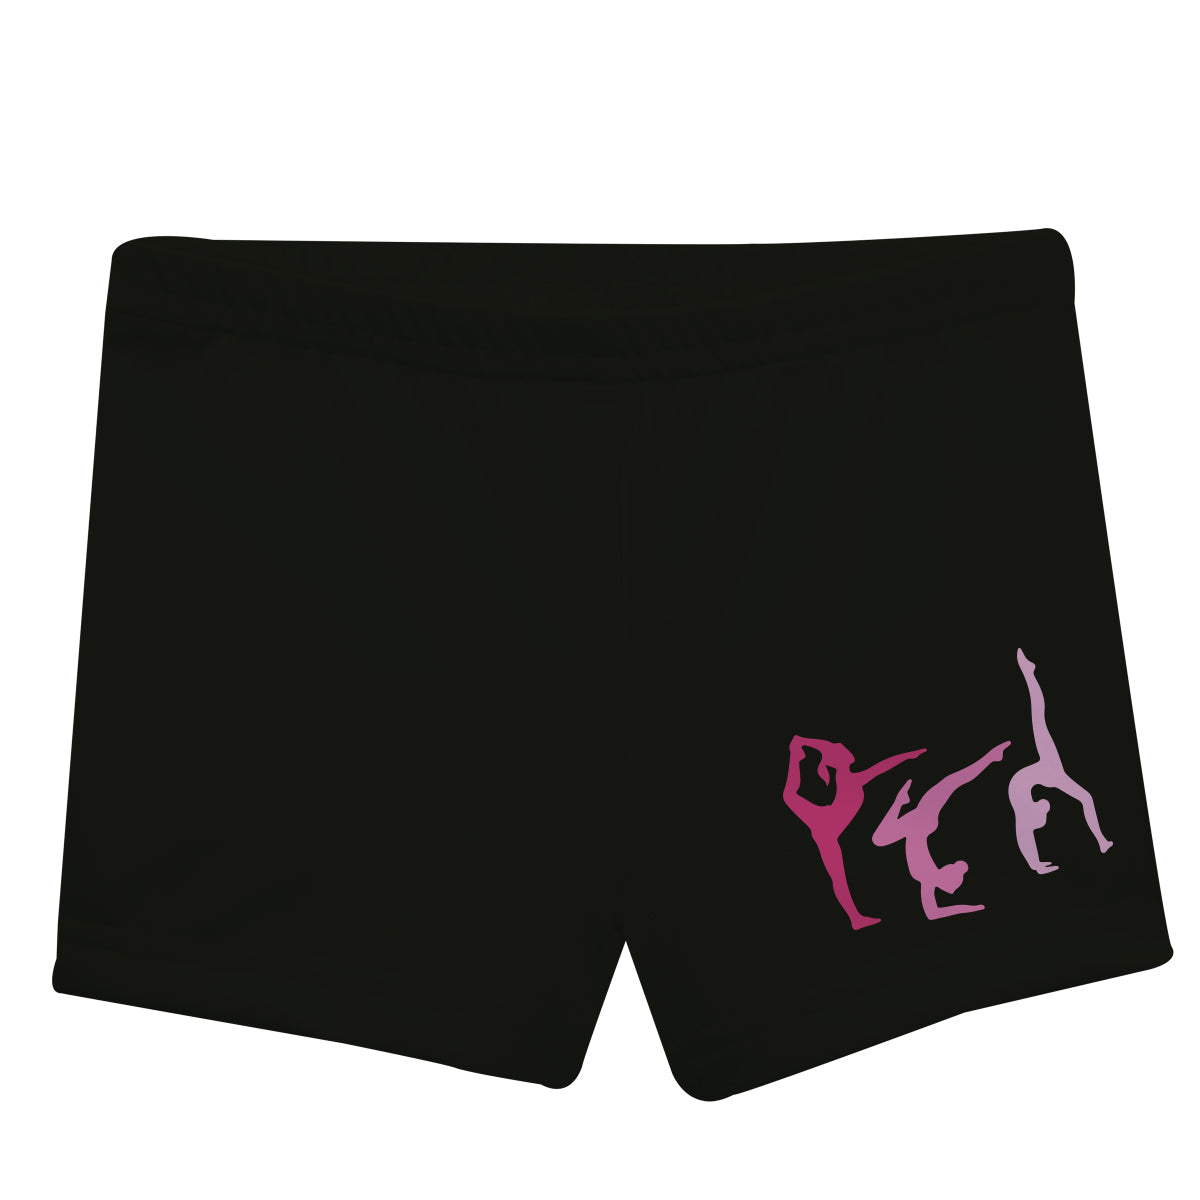 Black and pink gymnast shorts - Wimziy&Co.